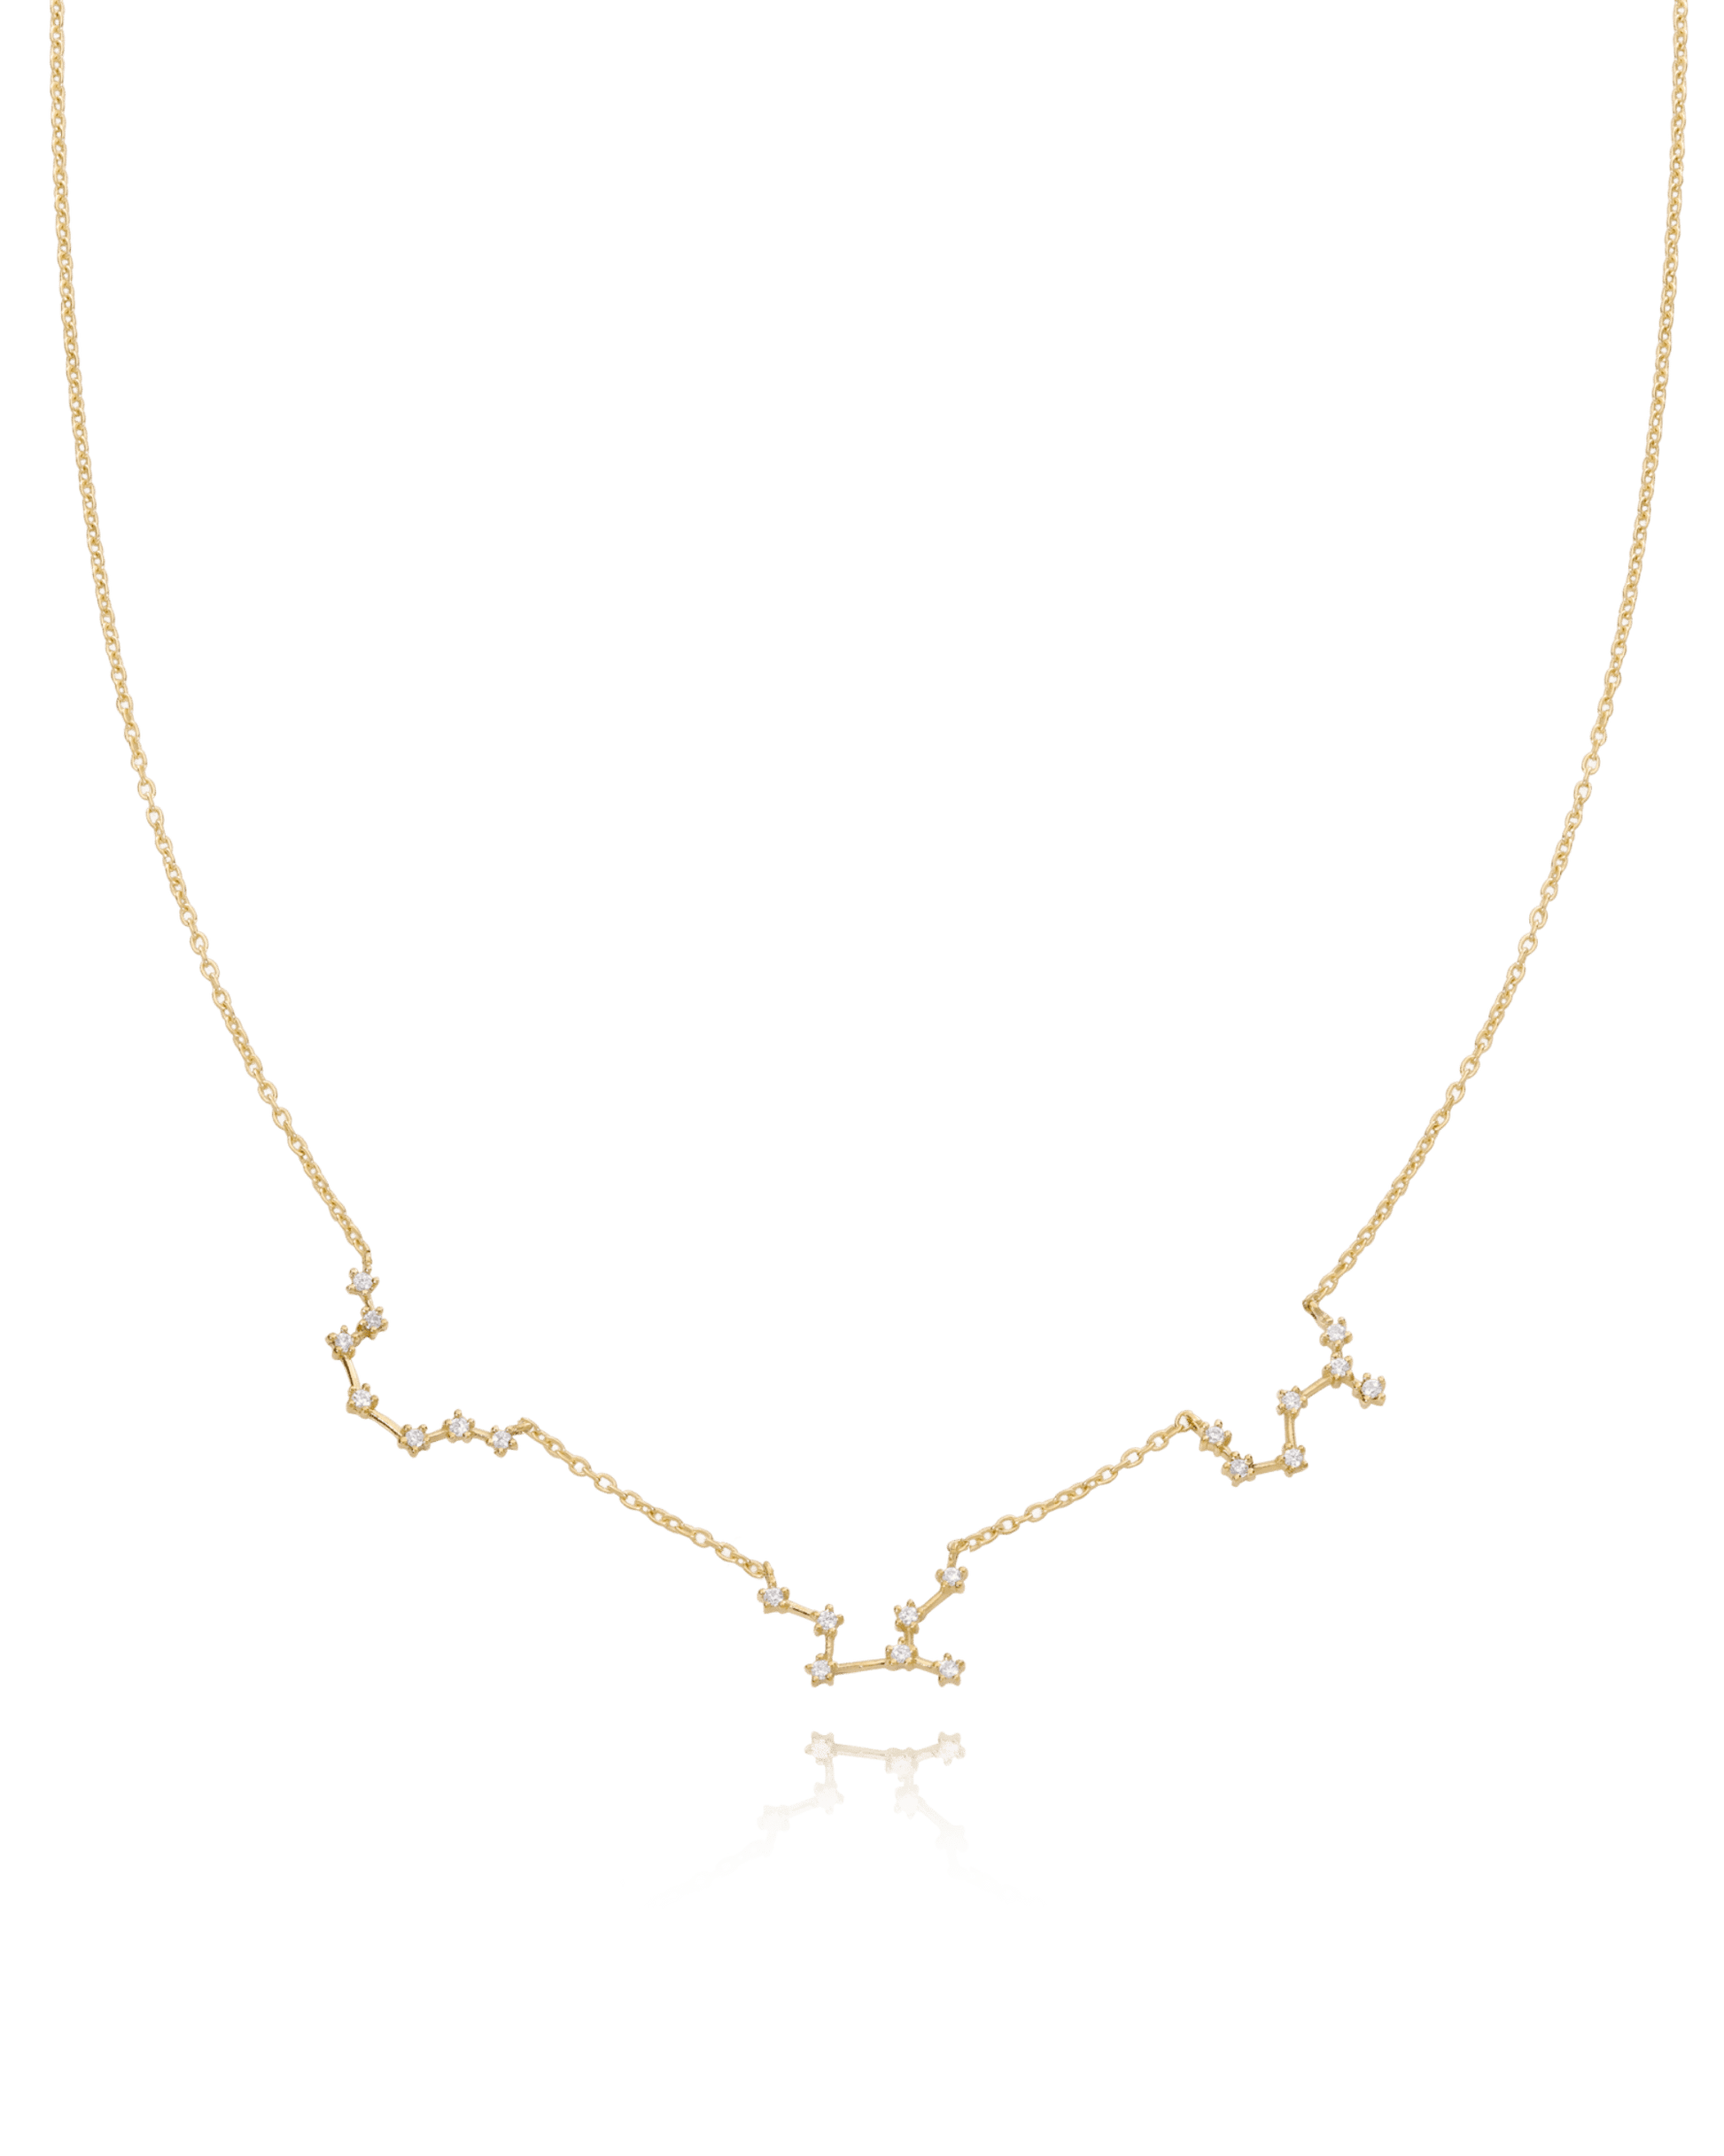 The Constellation Necklace - 925 Sterling Silver Necklaces magal-dev 